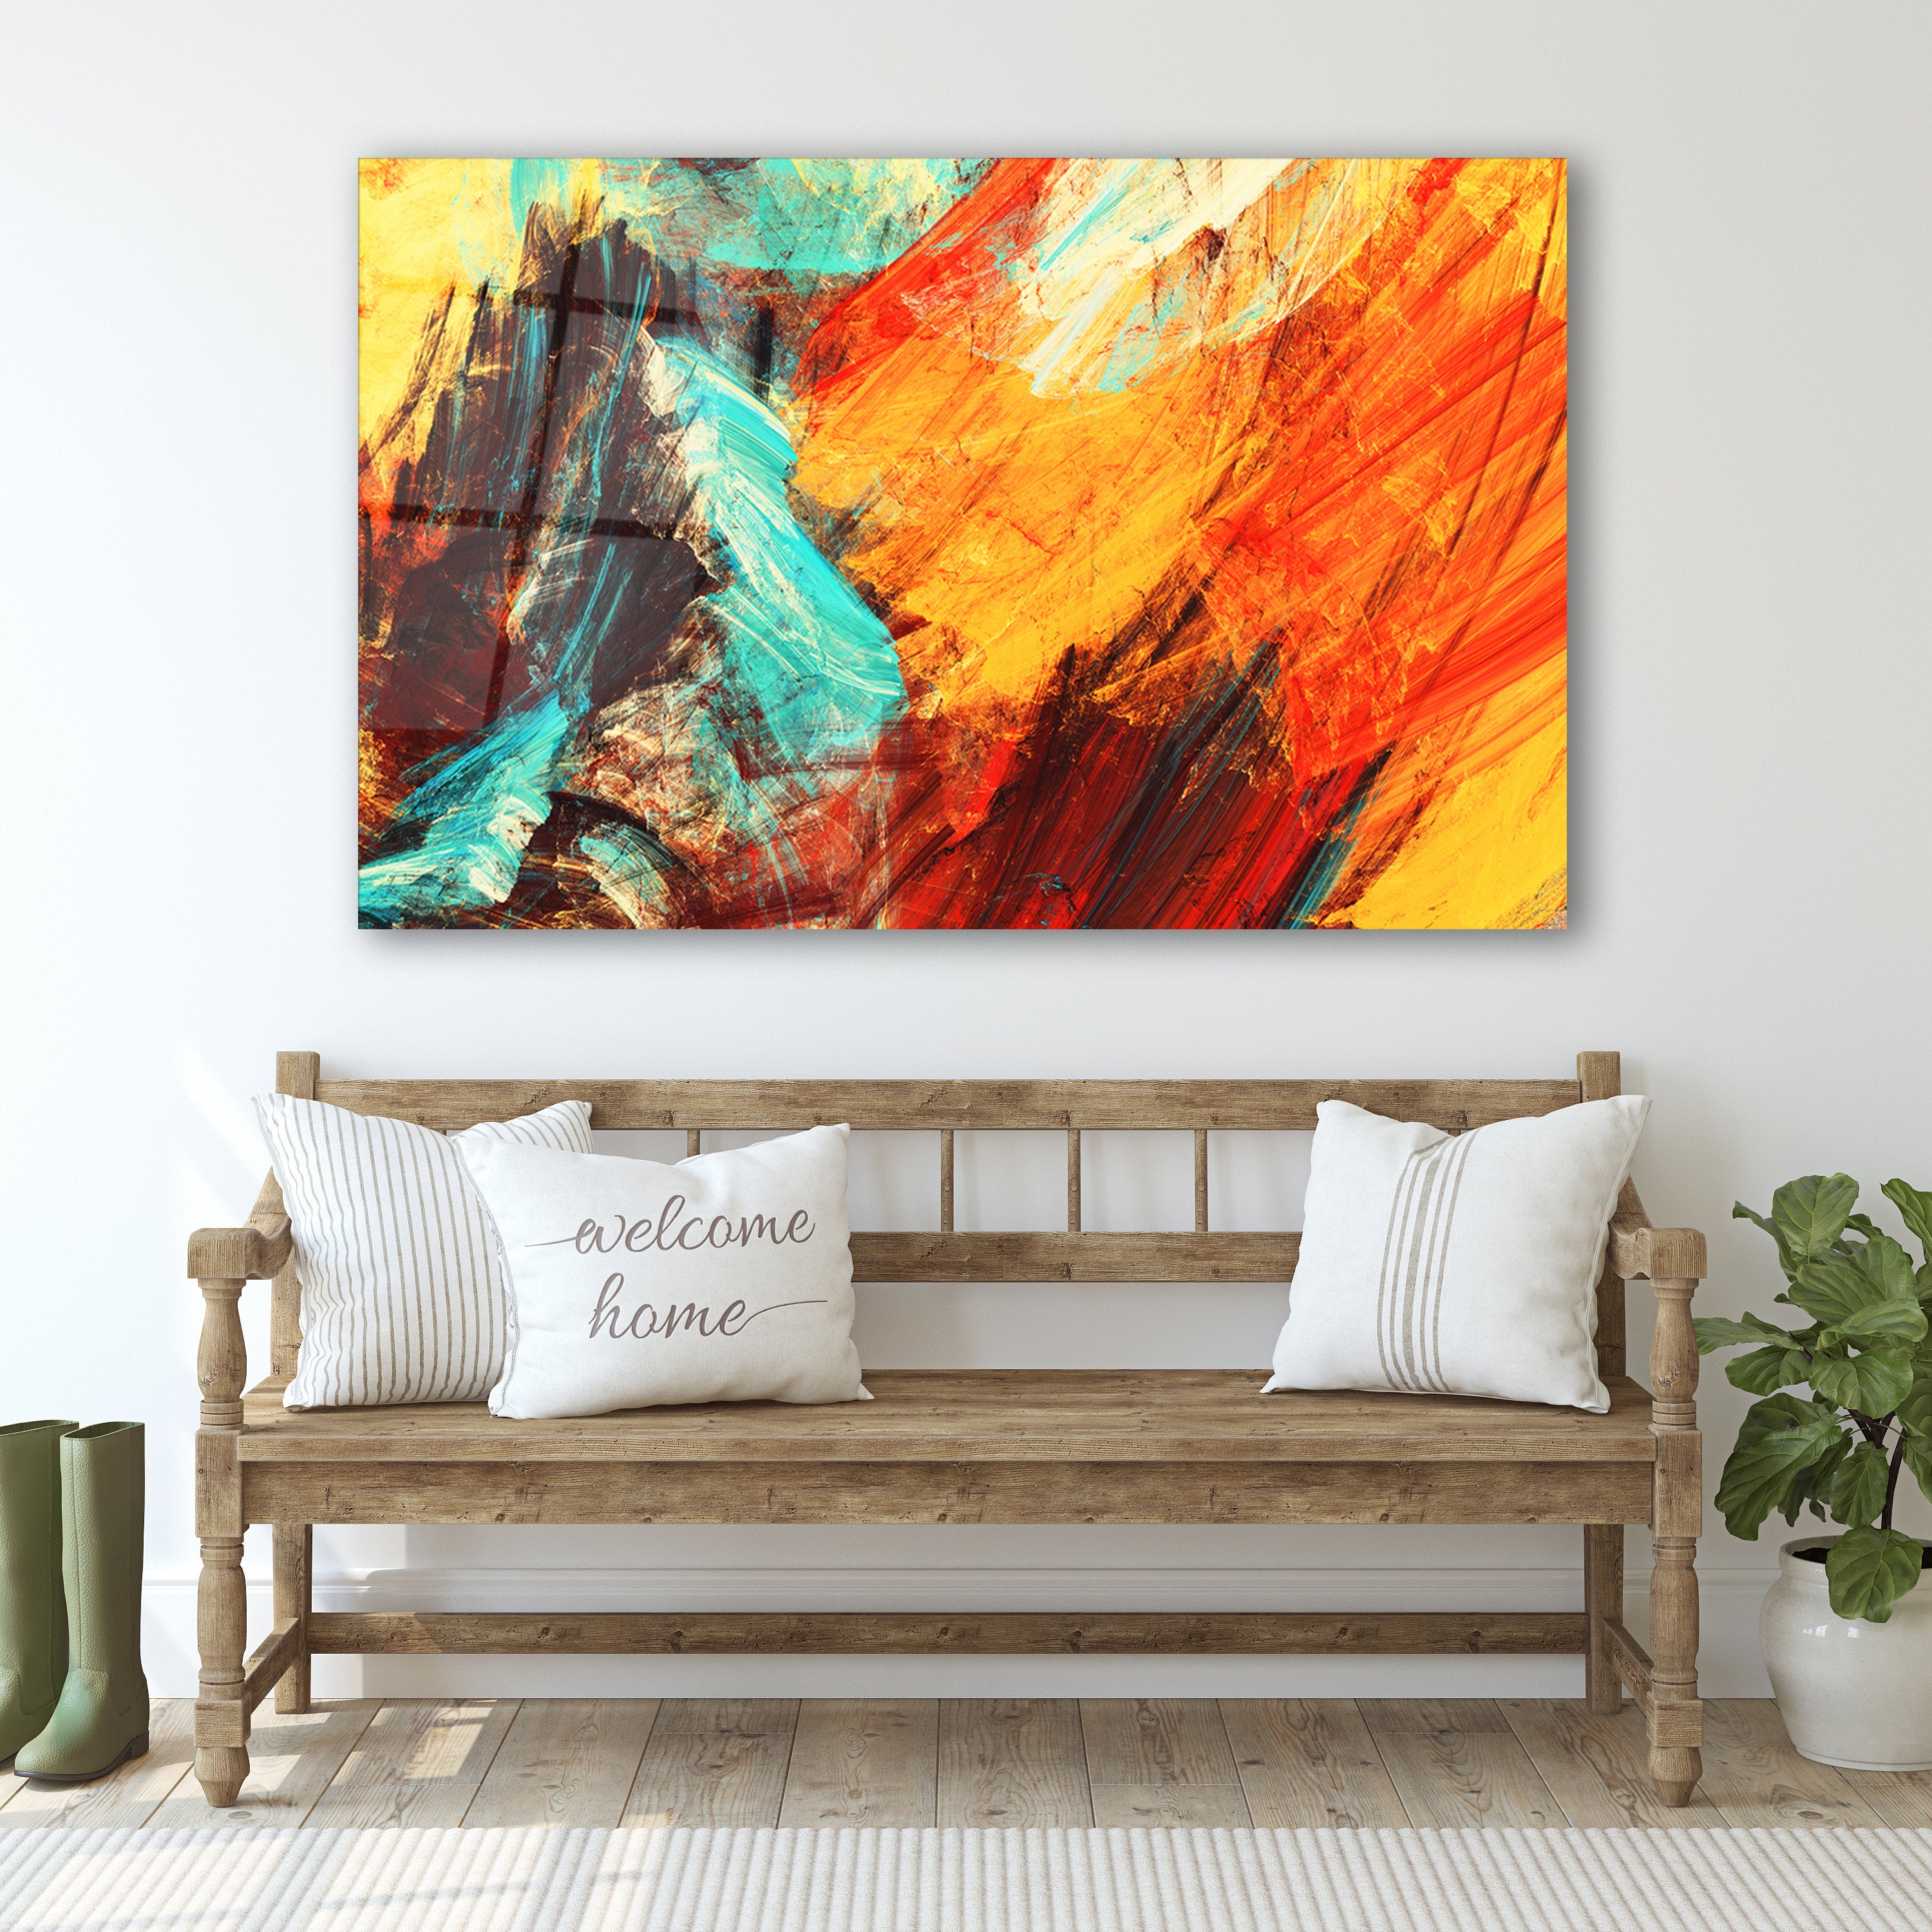 The Connection Canvas Wall Art